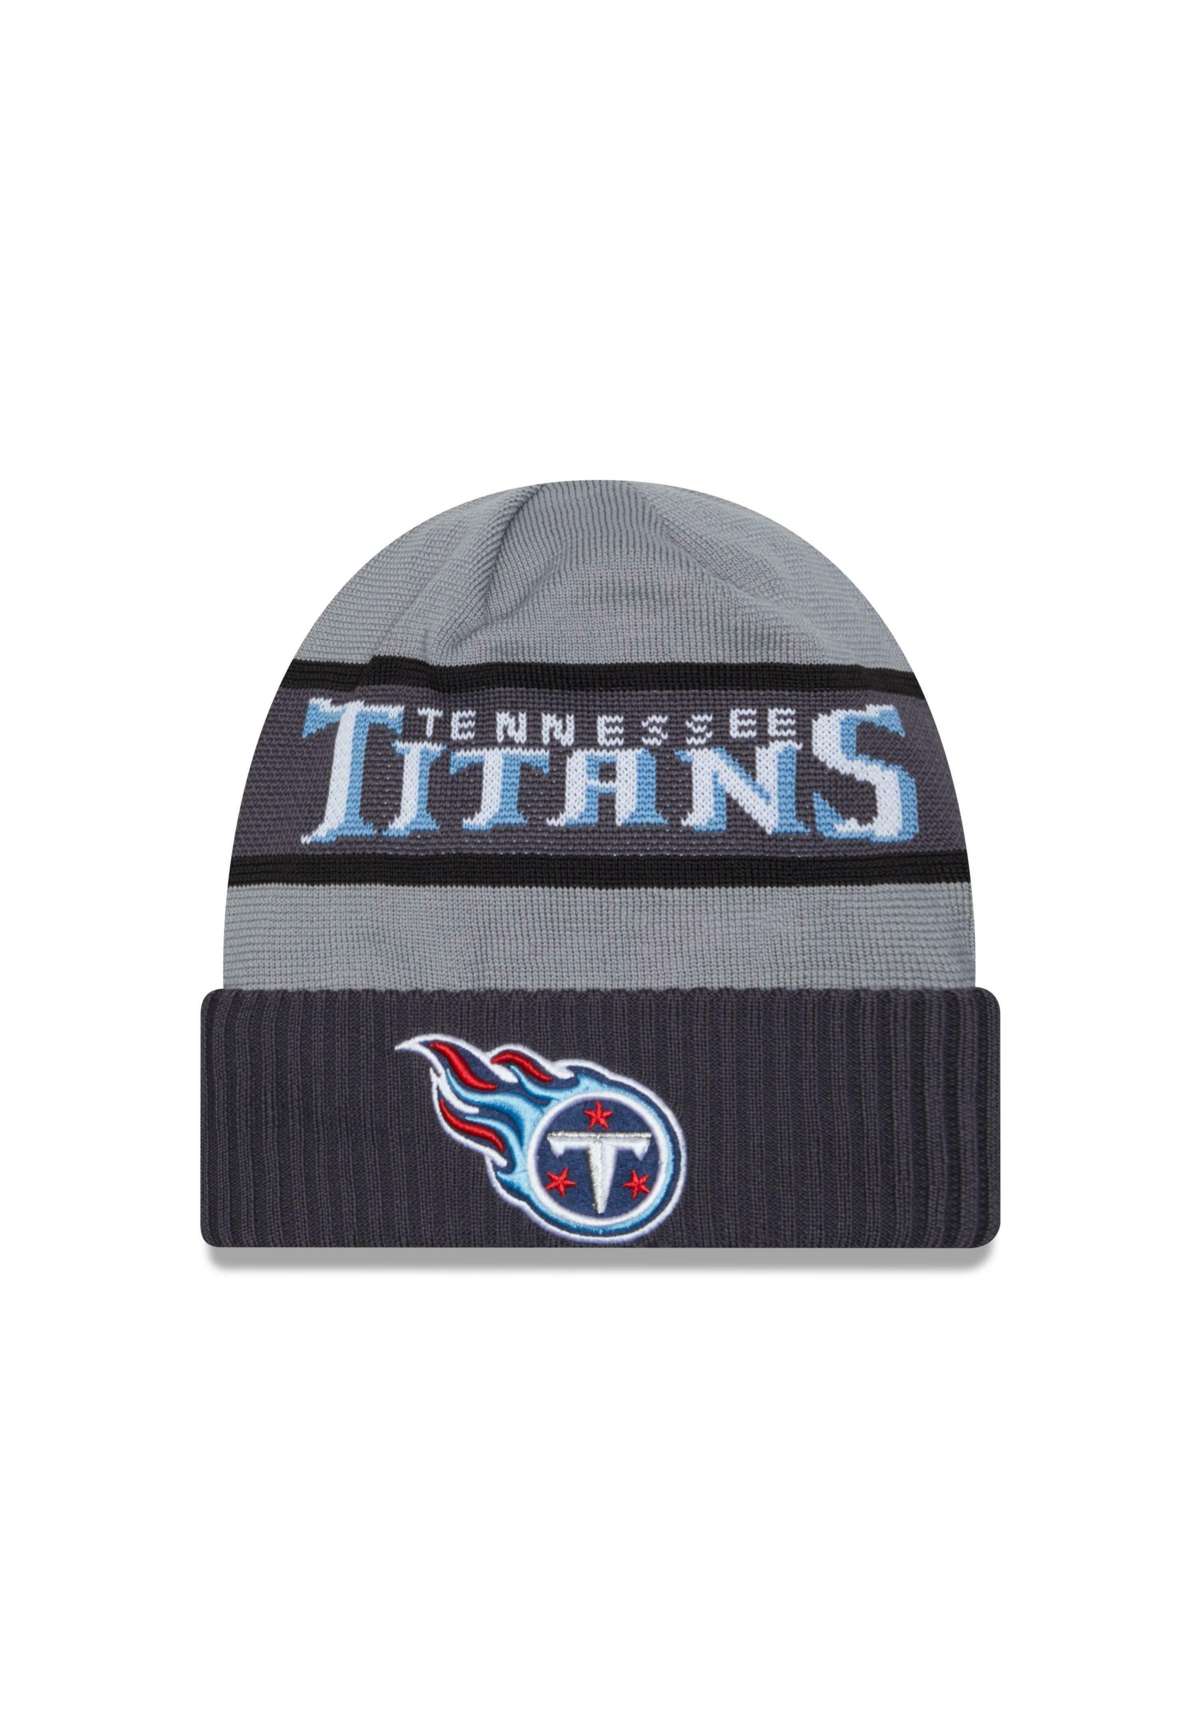 Шапка TENNESSEE TITANS NFL 2023 SIDELINE TECH